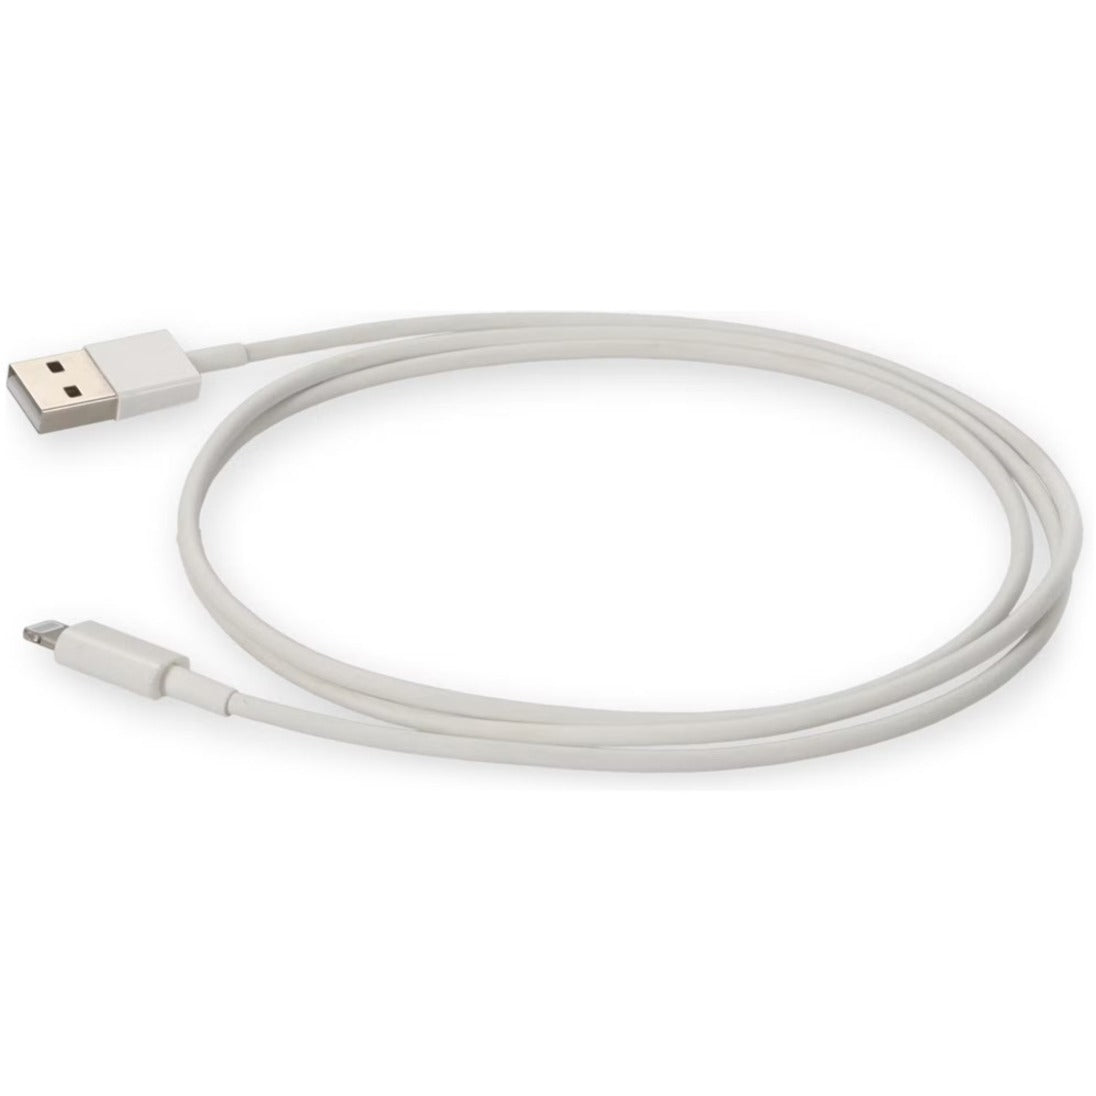 AddOn USB2LGTSL1MW 1m USB 2.0 (A) Male to Lightning Male White Cable, Data Transfer Cable for PC, Notebook, USB Charger, Smartphone, Tablet